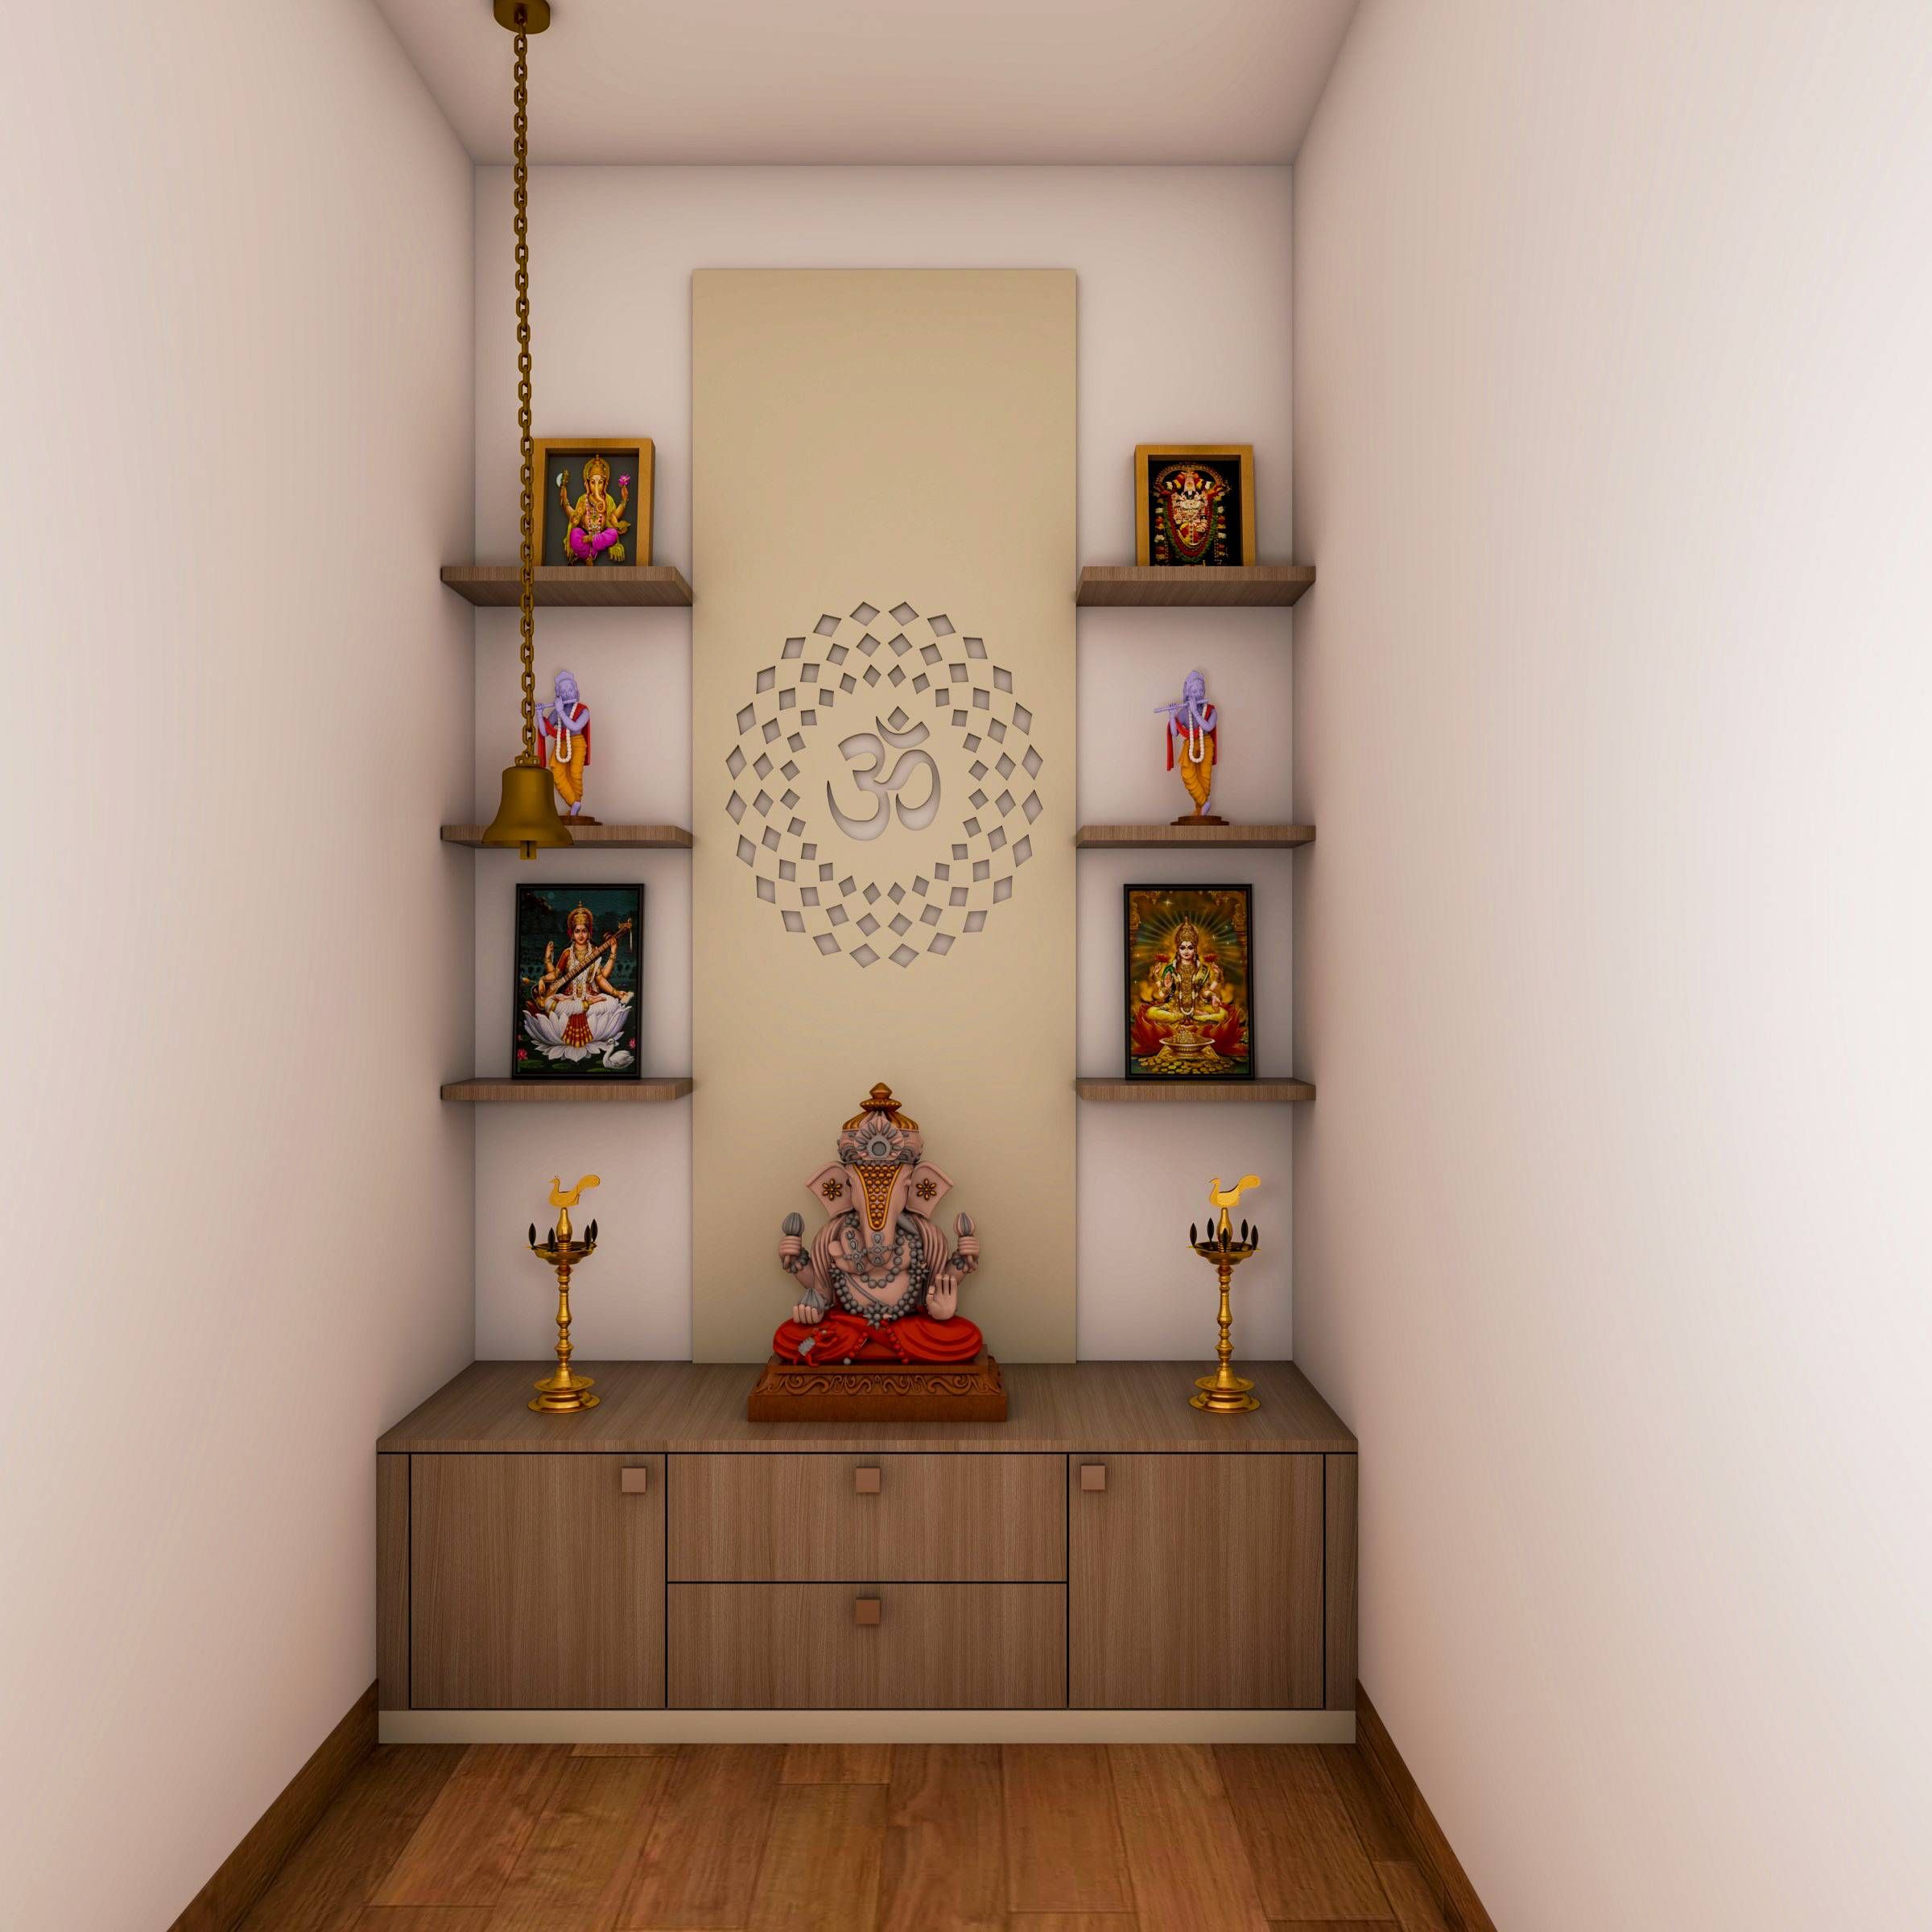 Contemporary Compact Pooja Room Design With Storage Unit